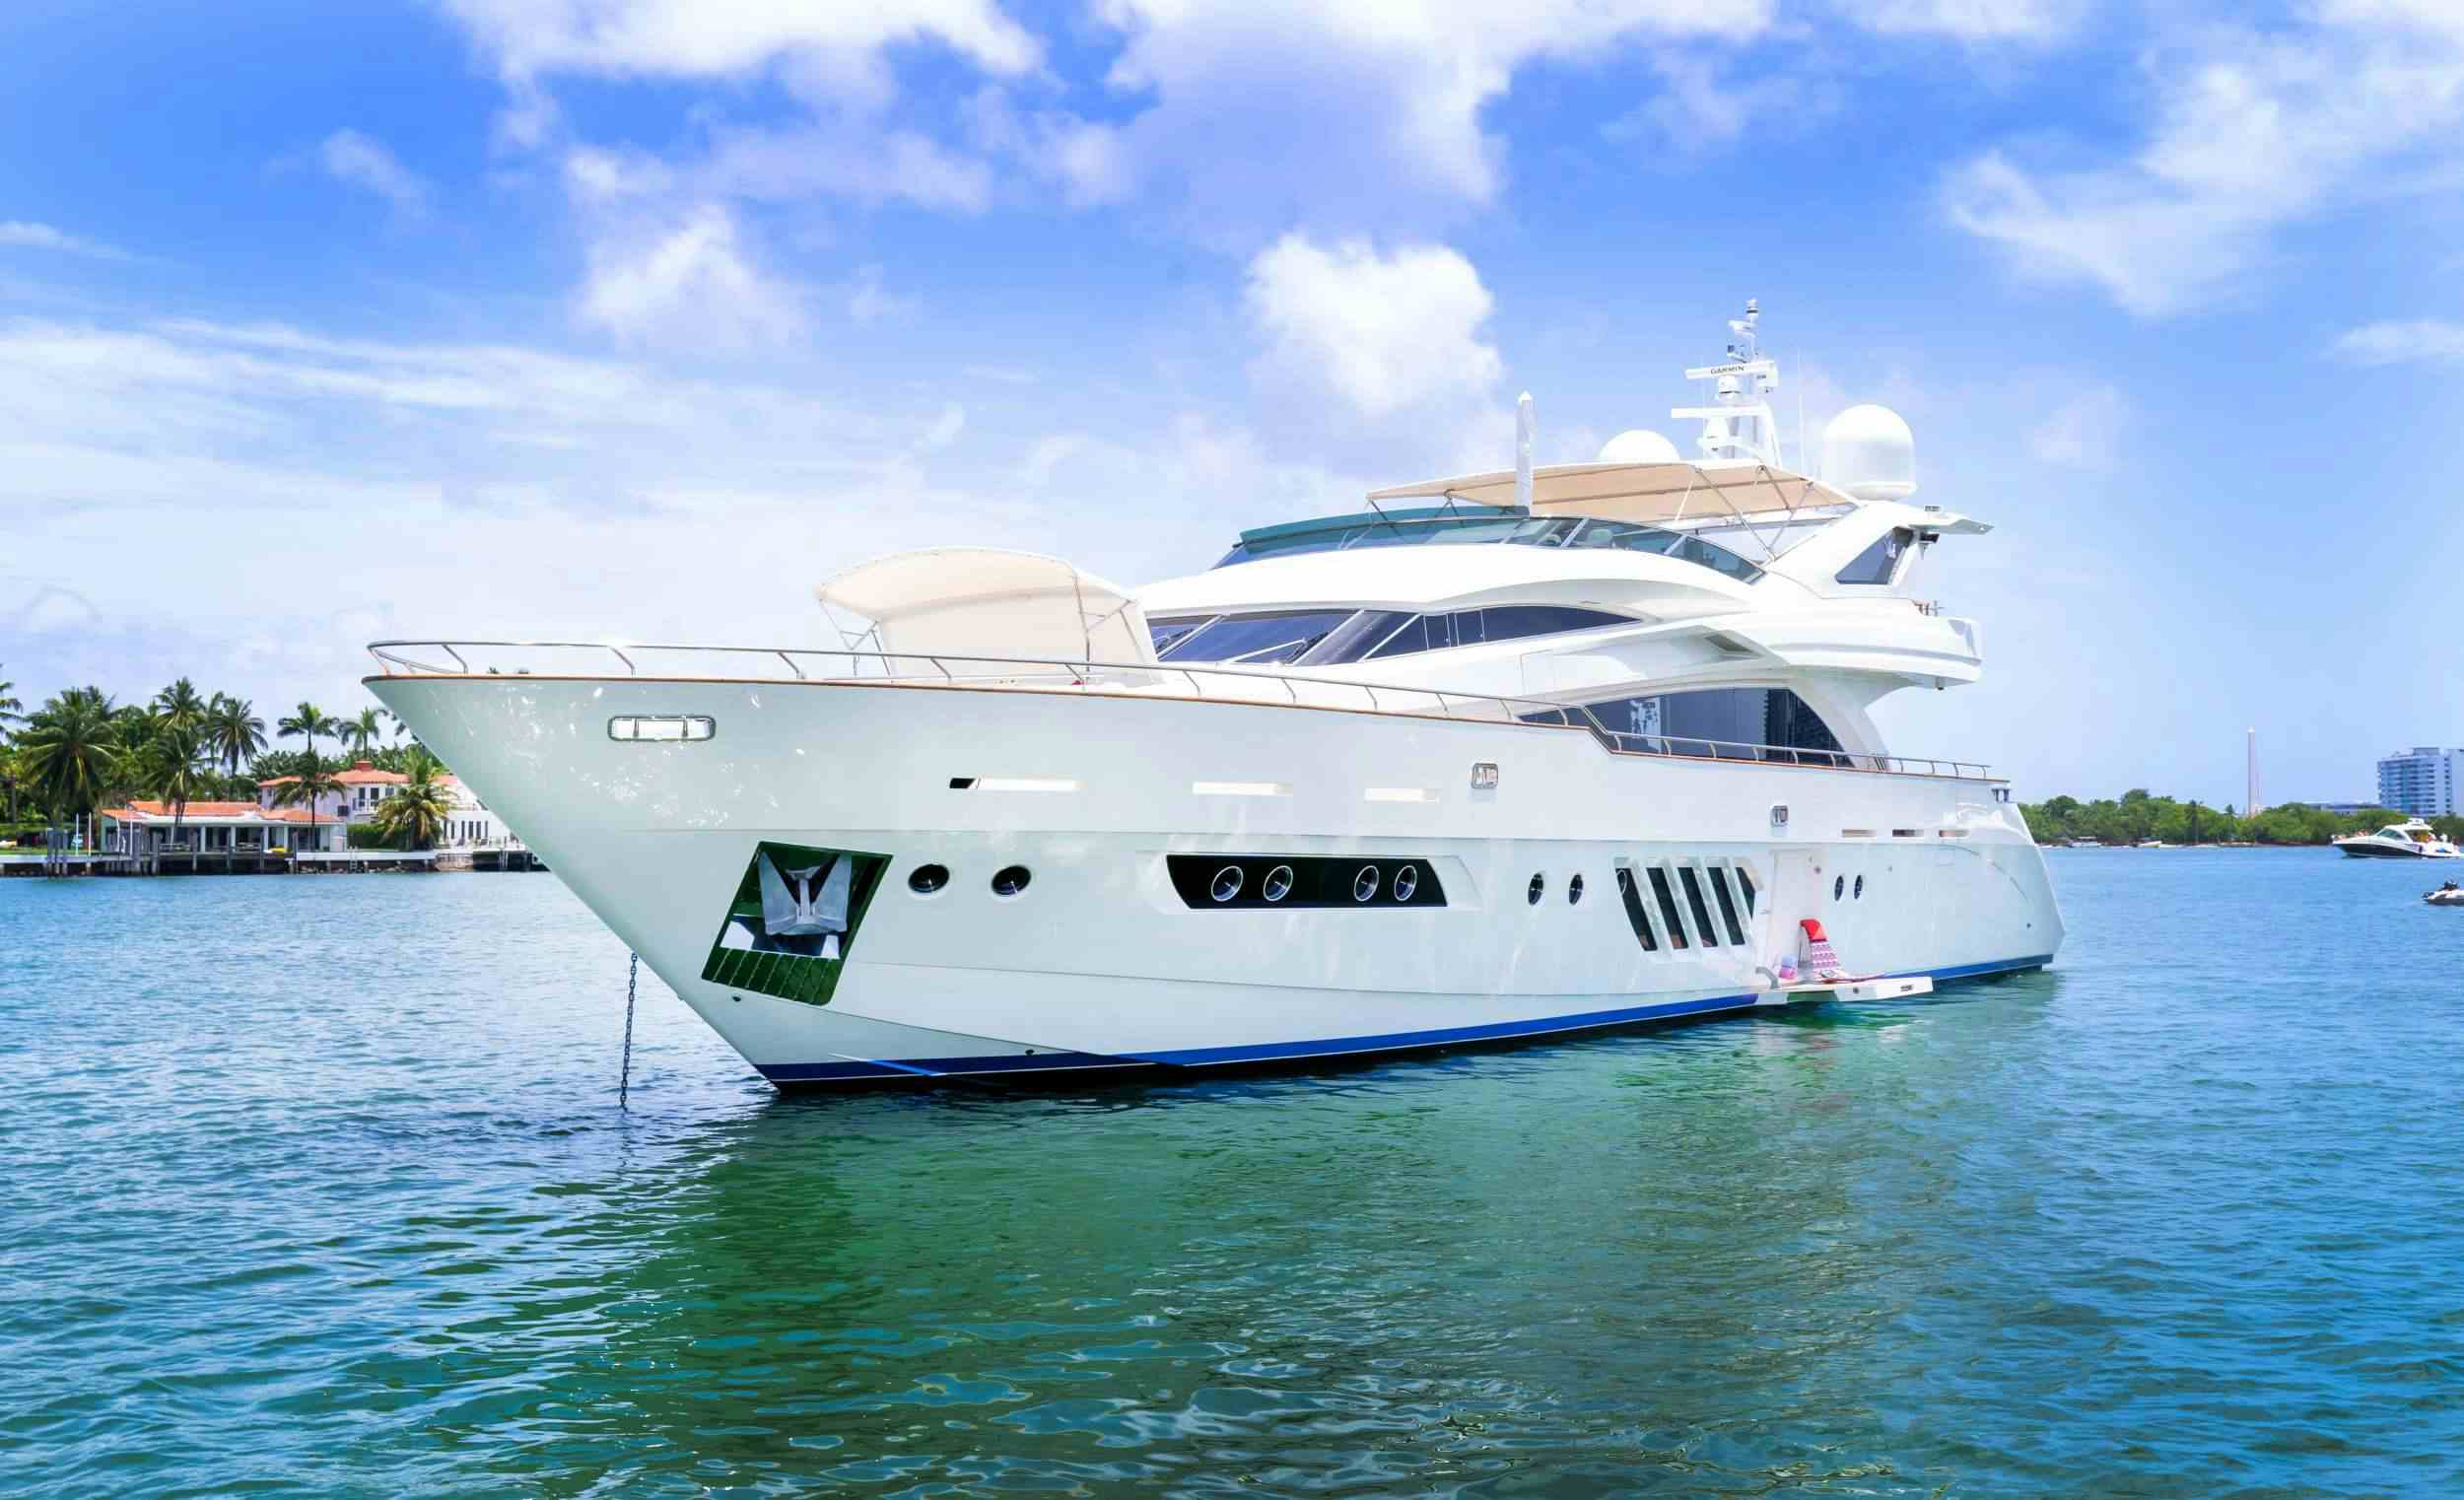 95 DOMINATOR - Yacht Charter Annapolis & Boat hire in US East Coast & Bahamas 1